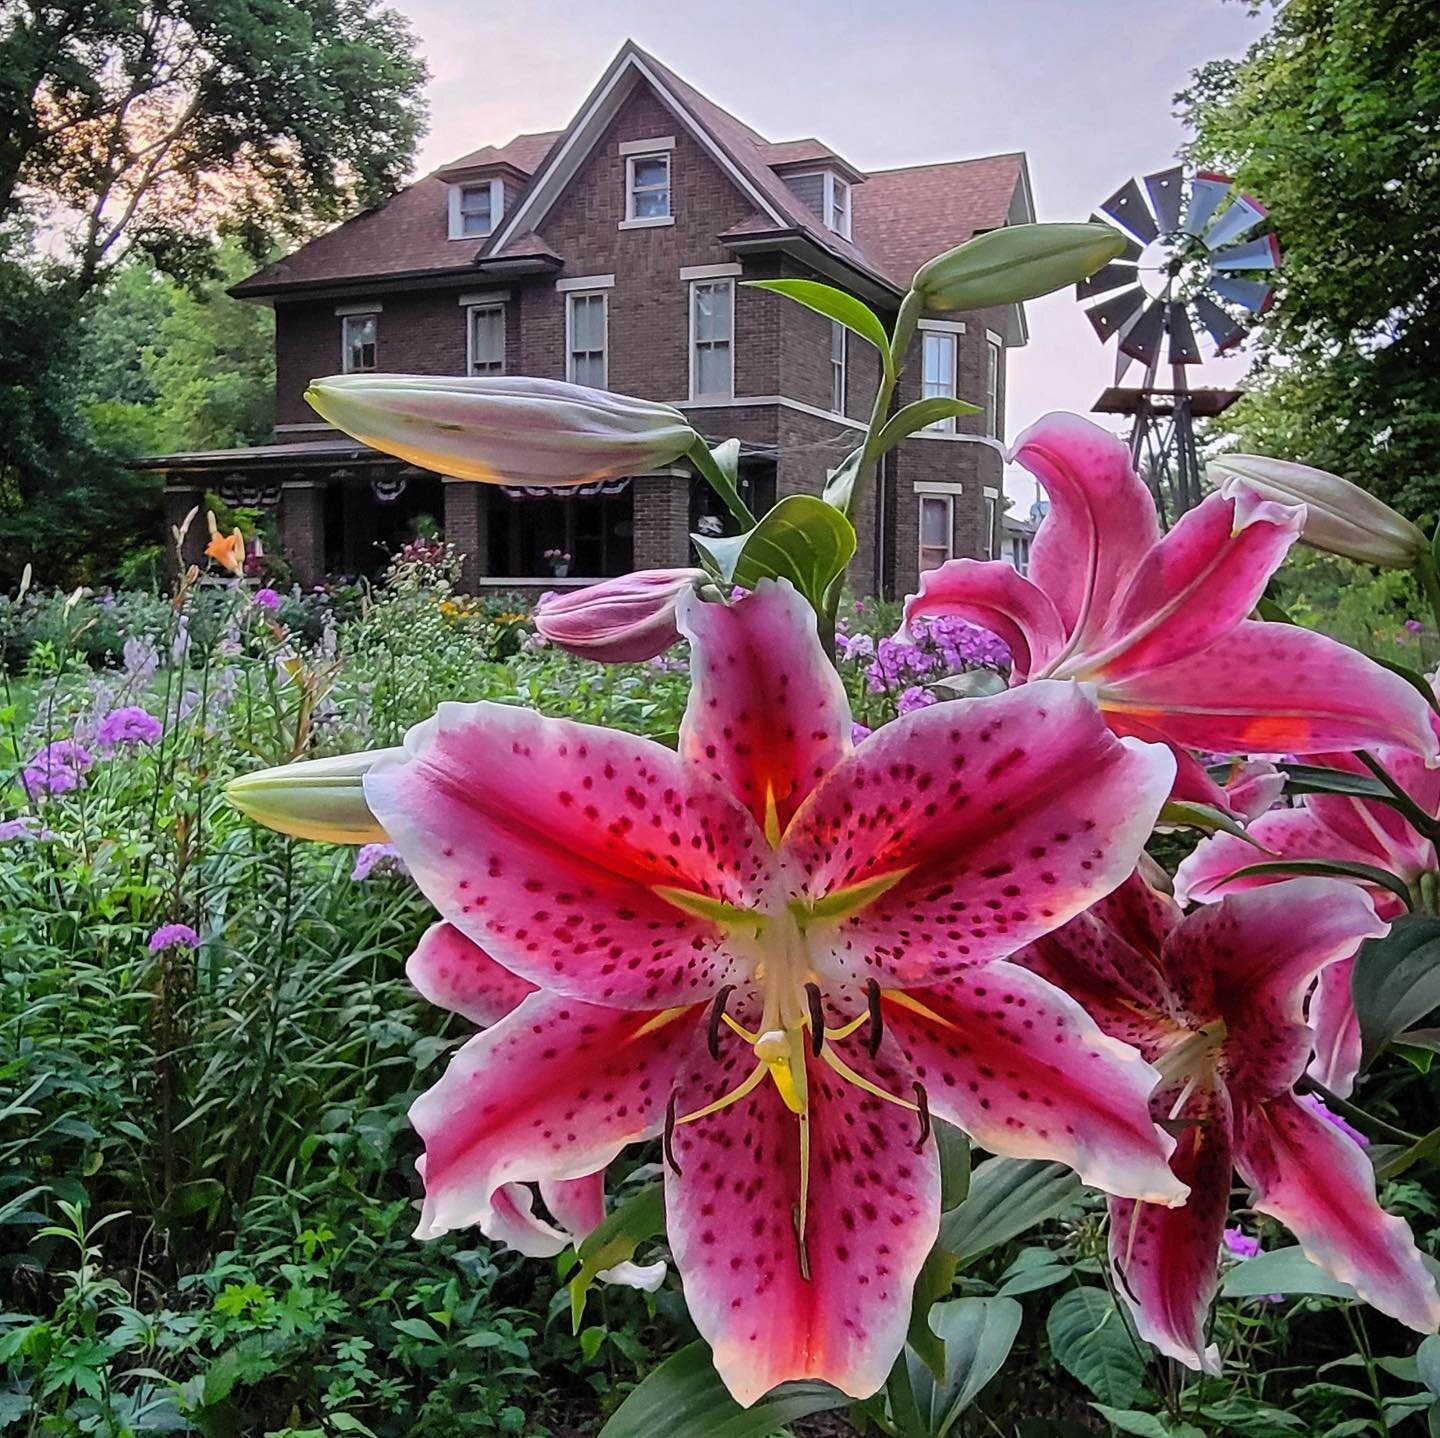 The lilies are still popping in the gardens! 💕🌺💕